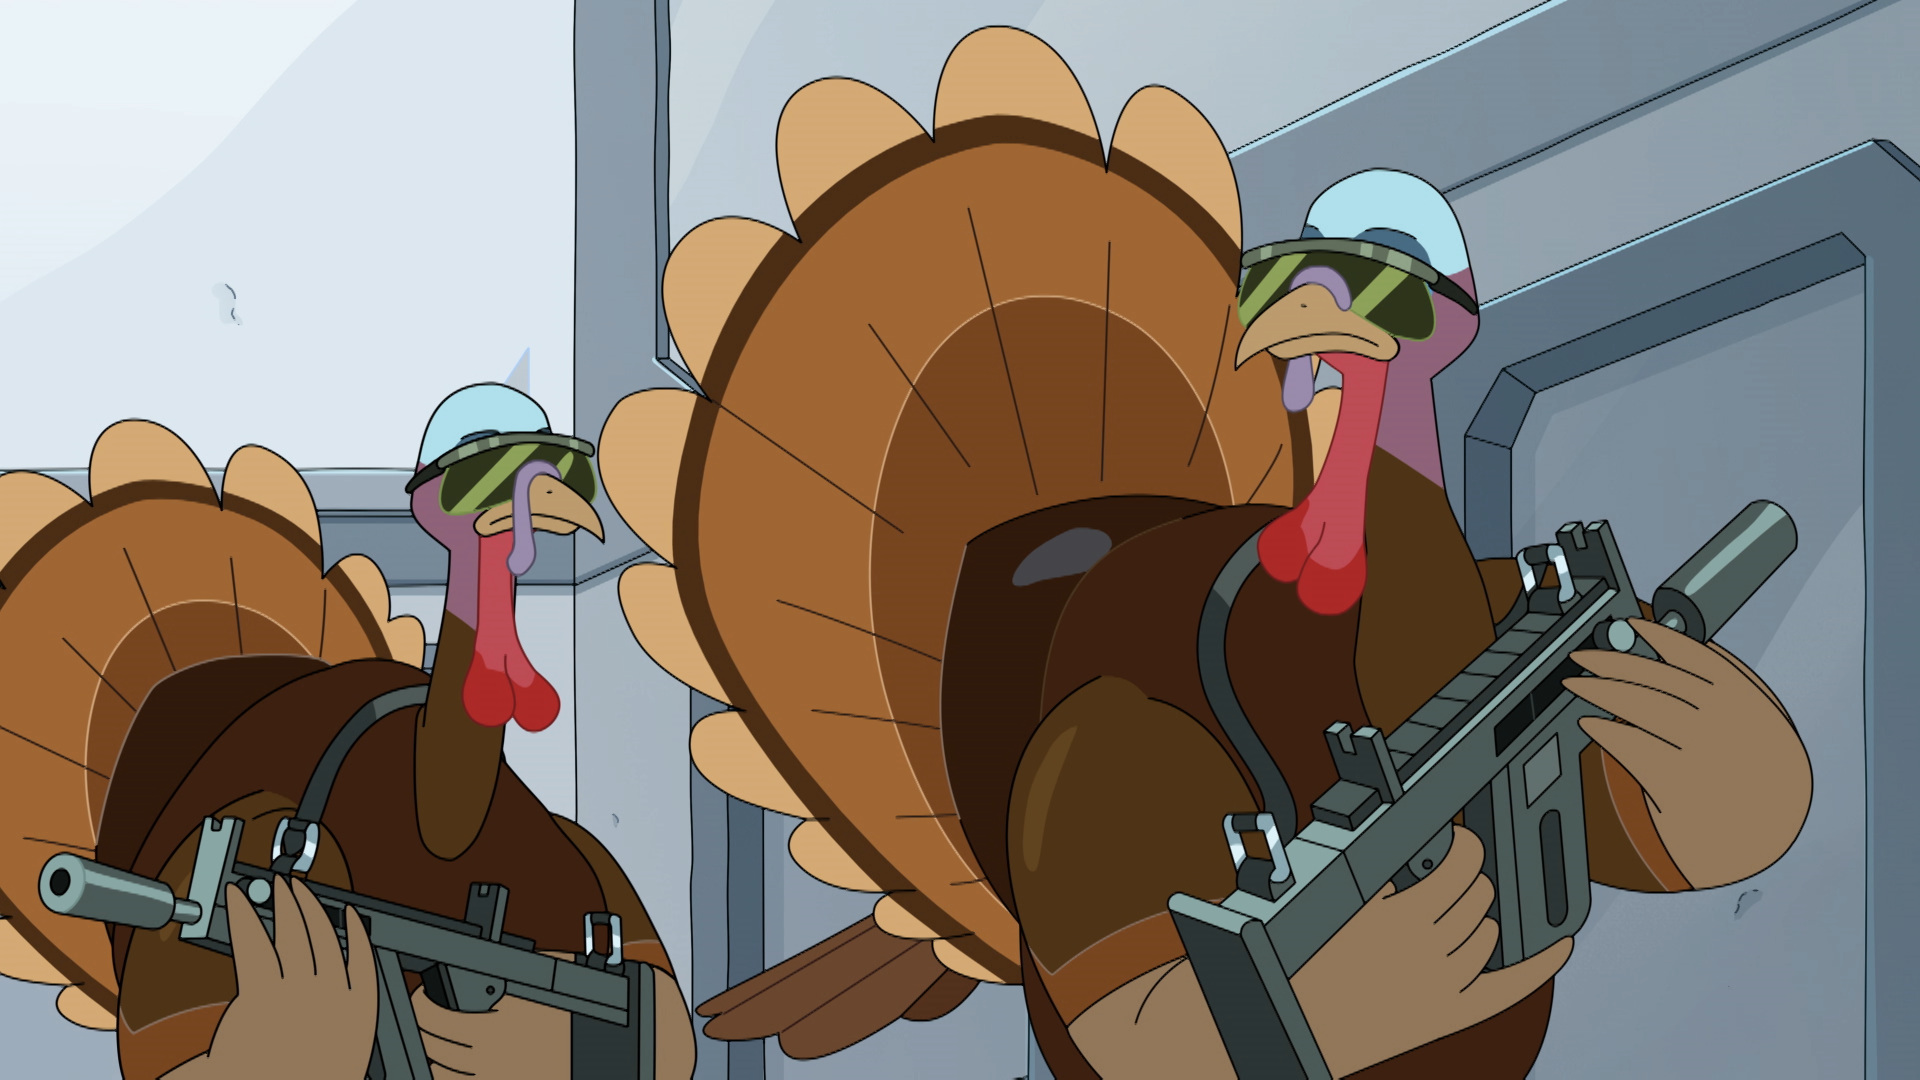 Rick And Morty ask if changing into a turkey can solve your problems